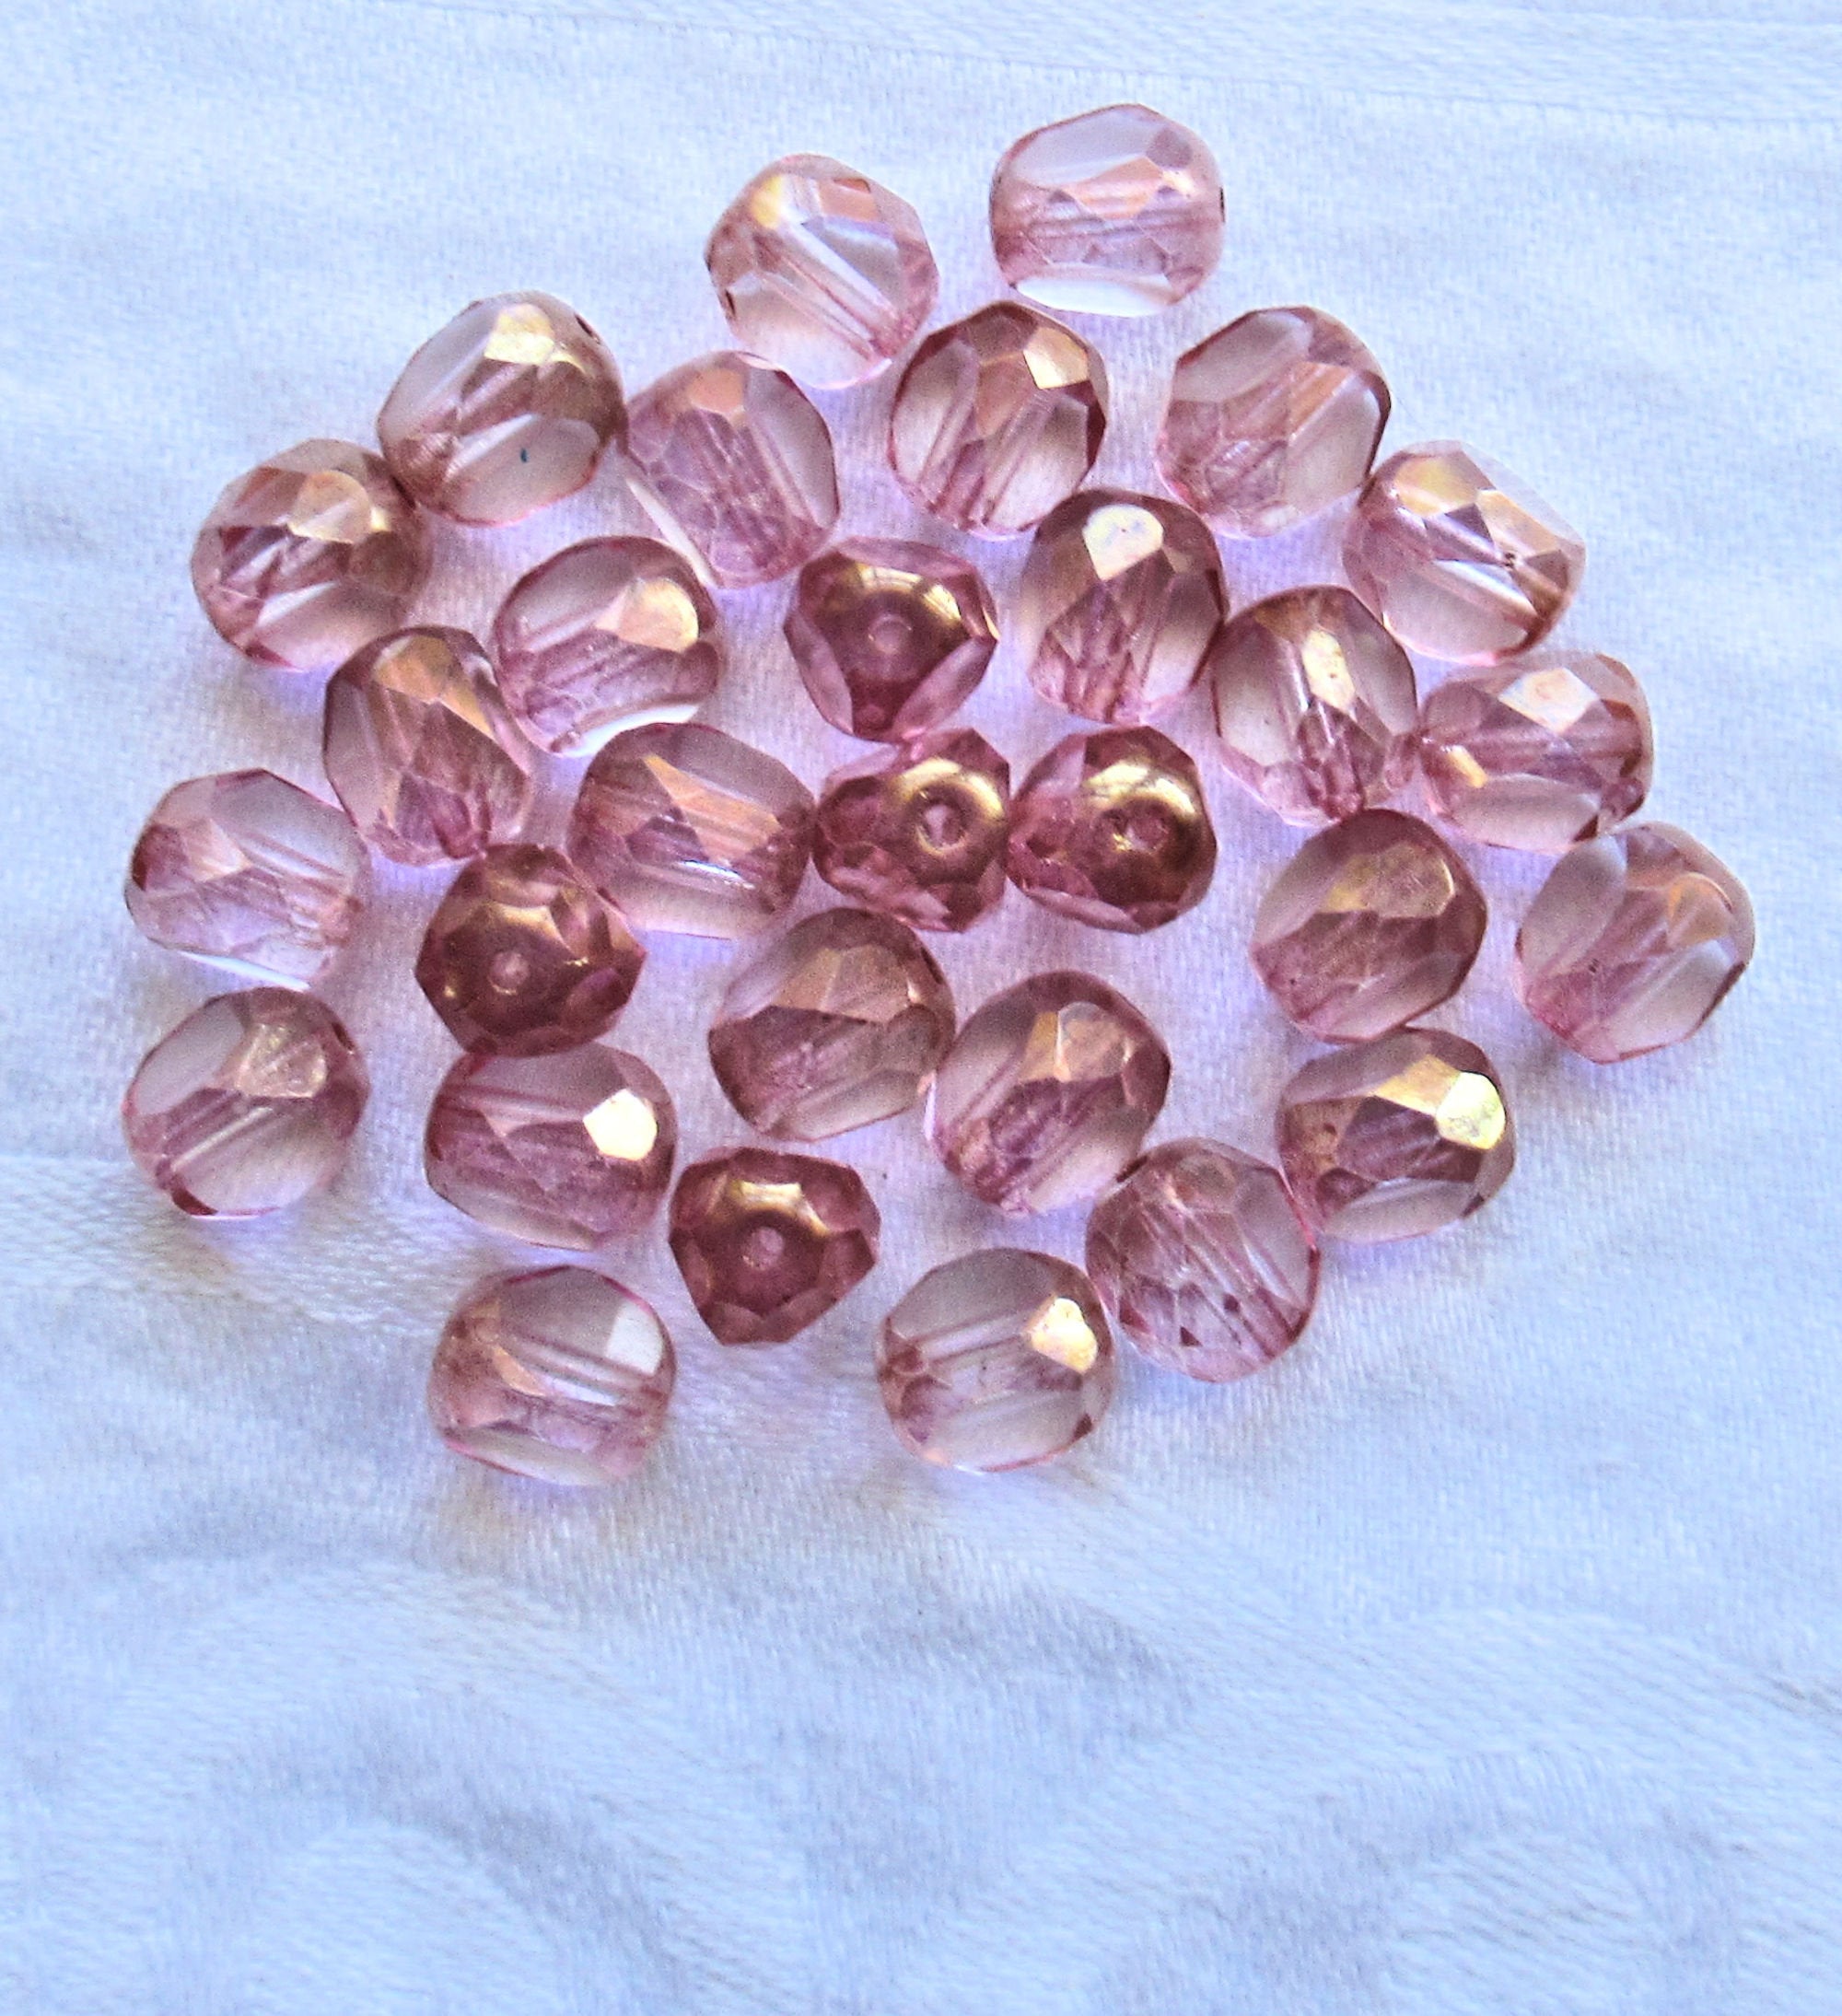 25 Tricut, Tri-cut Czech glass Round beads - pink with gold